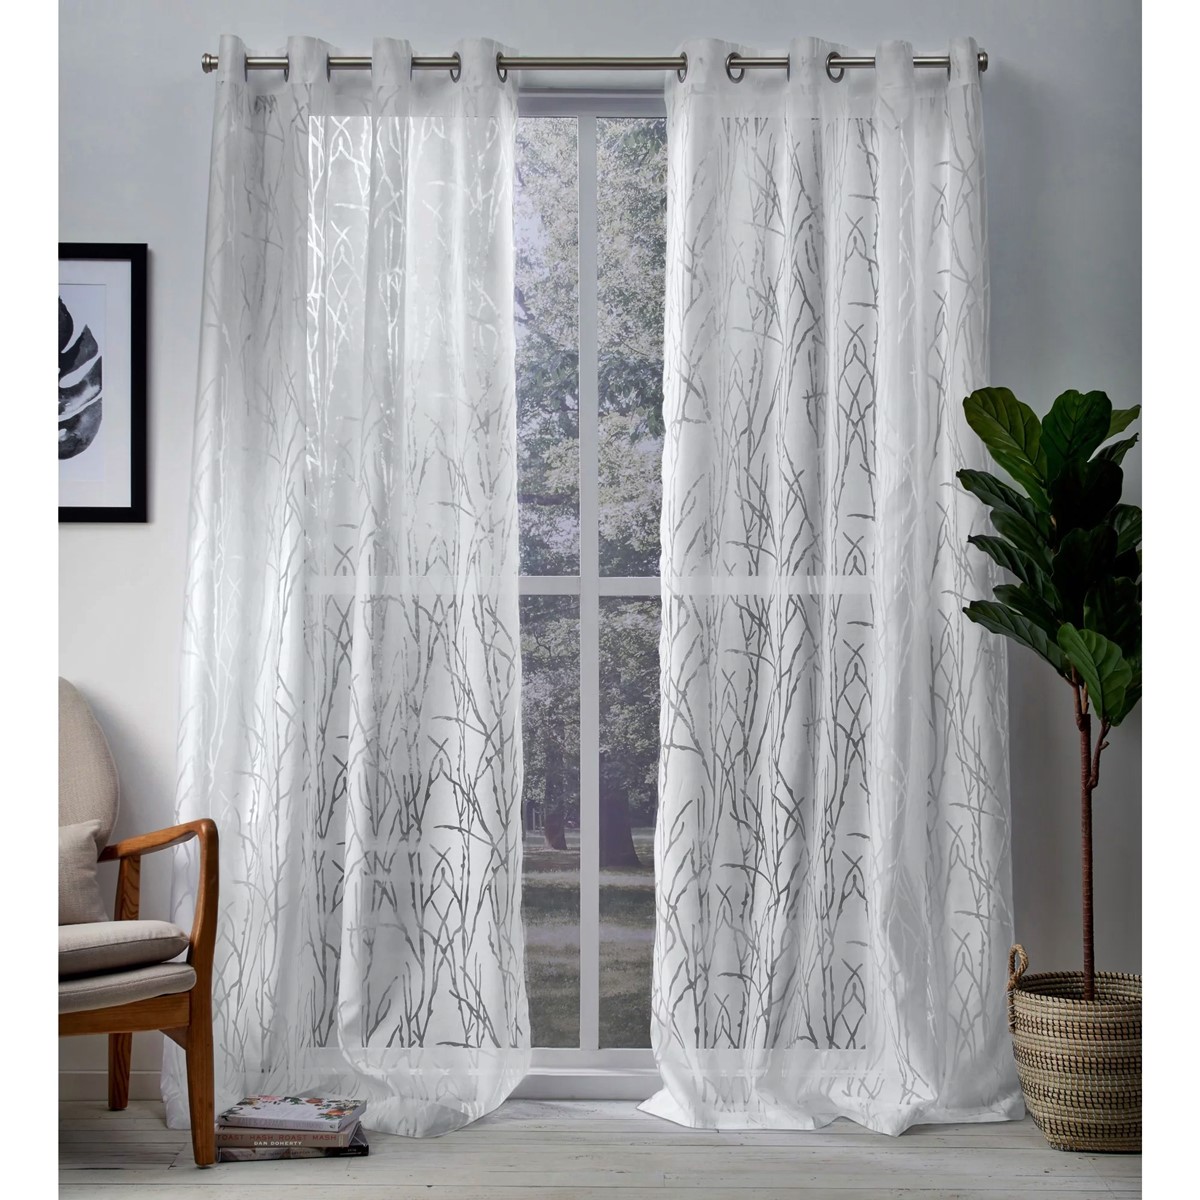 What Is Curtain Panel